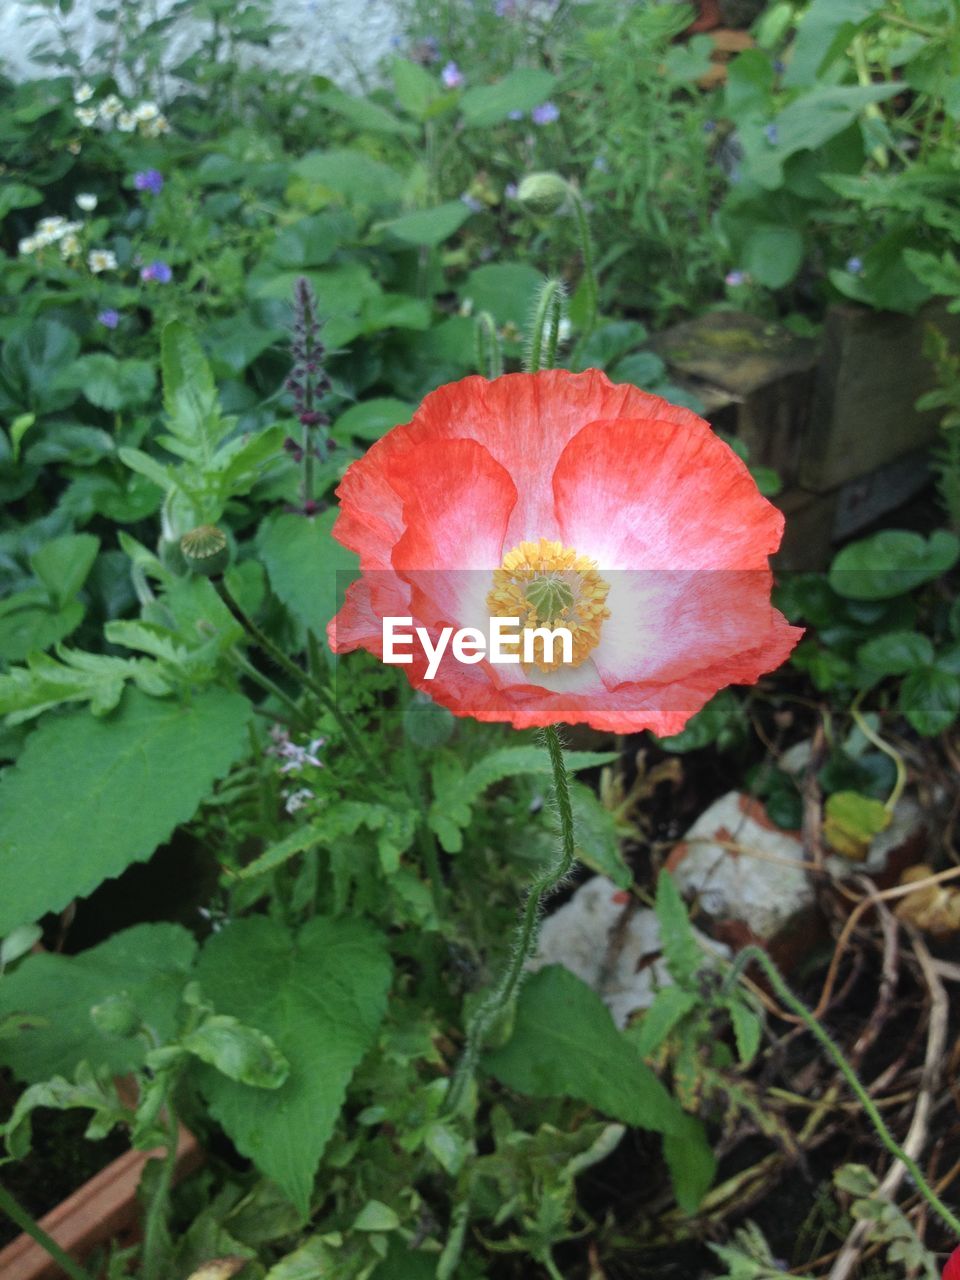 CLOSE-UP OF POPPY FLOWER BLOOMING OUTDOORS